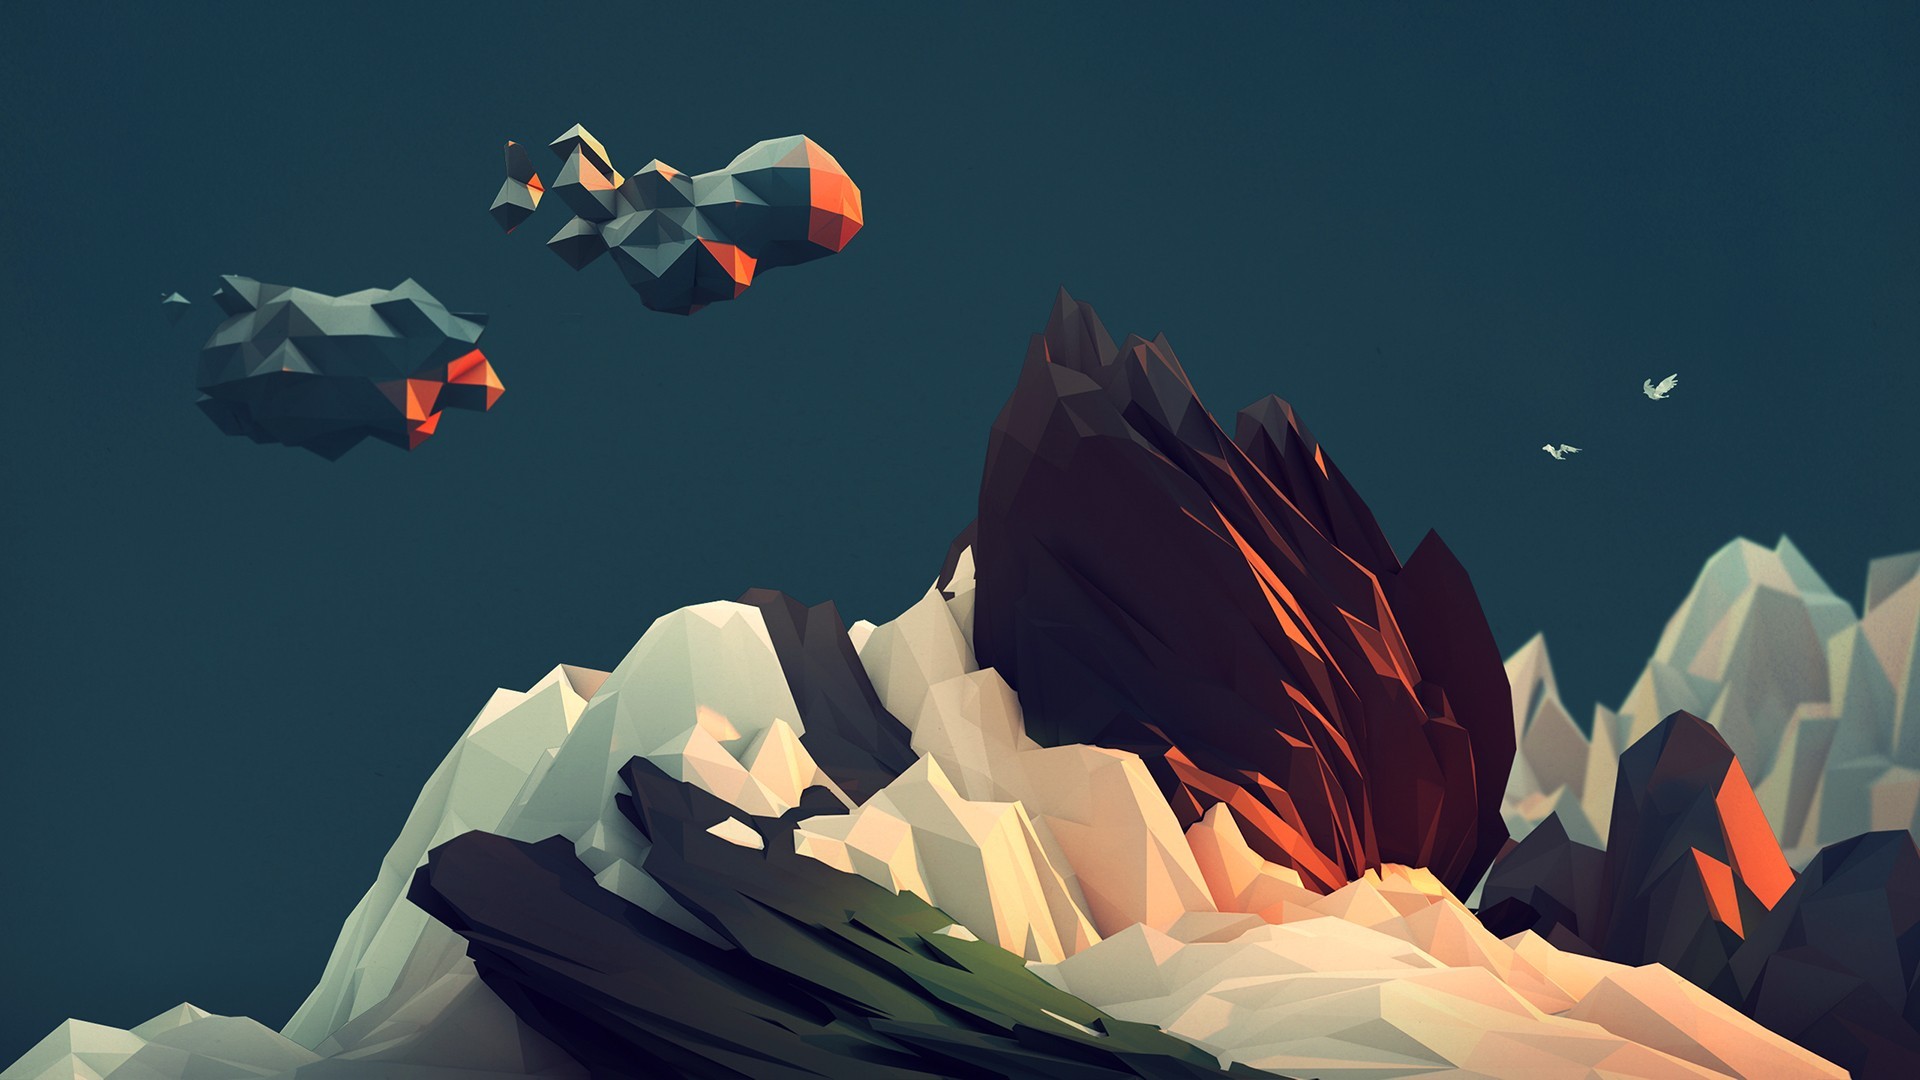 General 1920x1080 clouds mountains Trixel low poly abstract teal CGI digital art birds